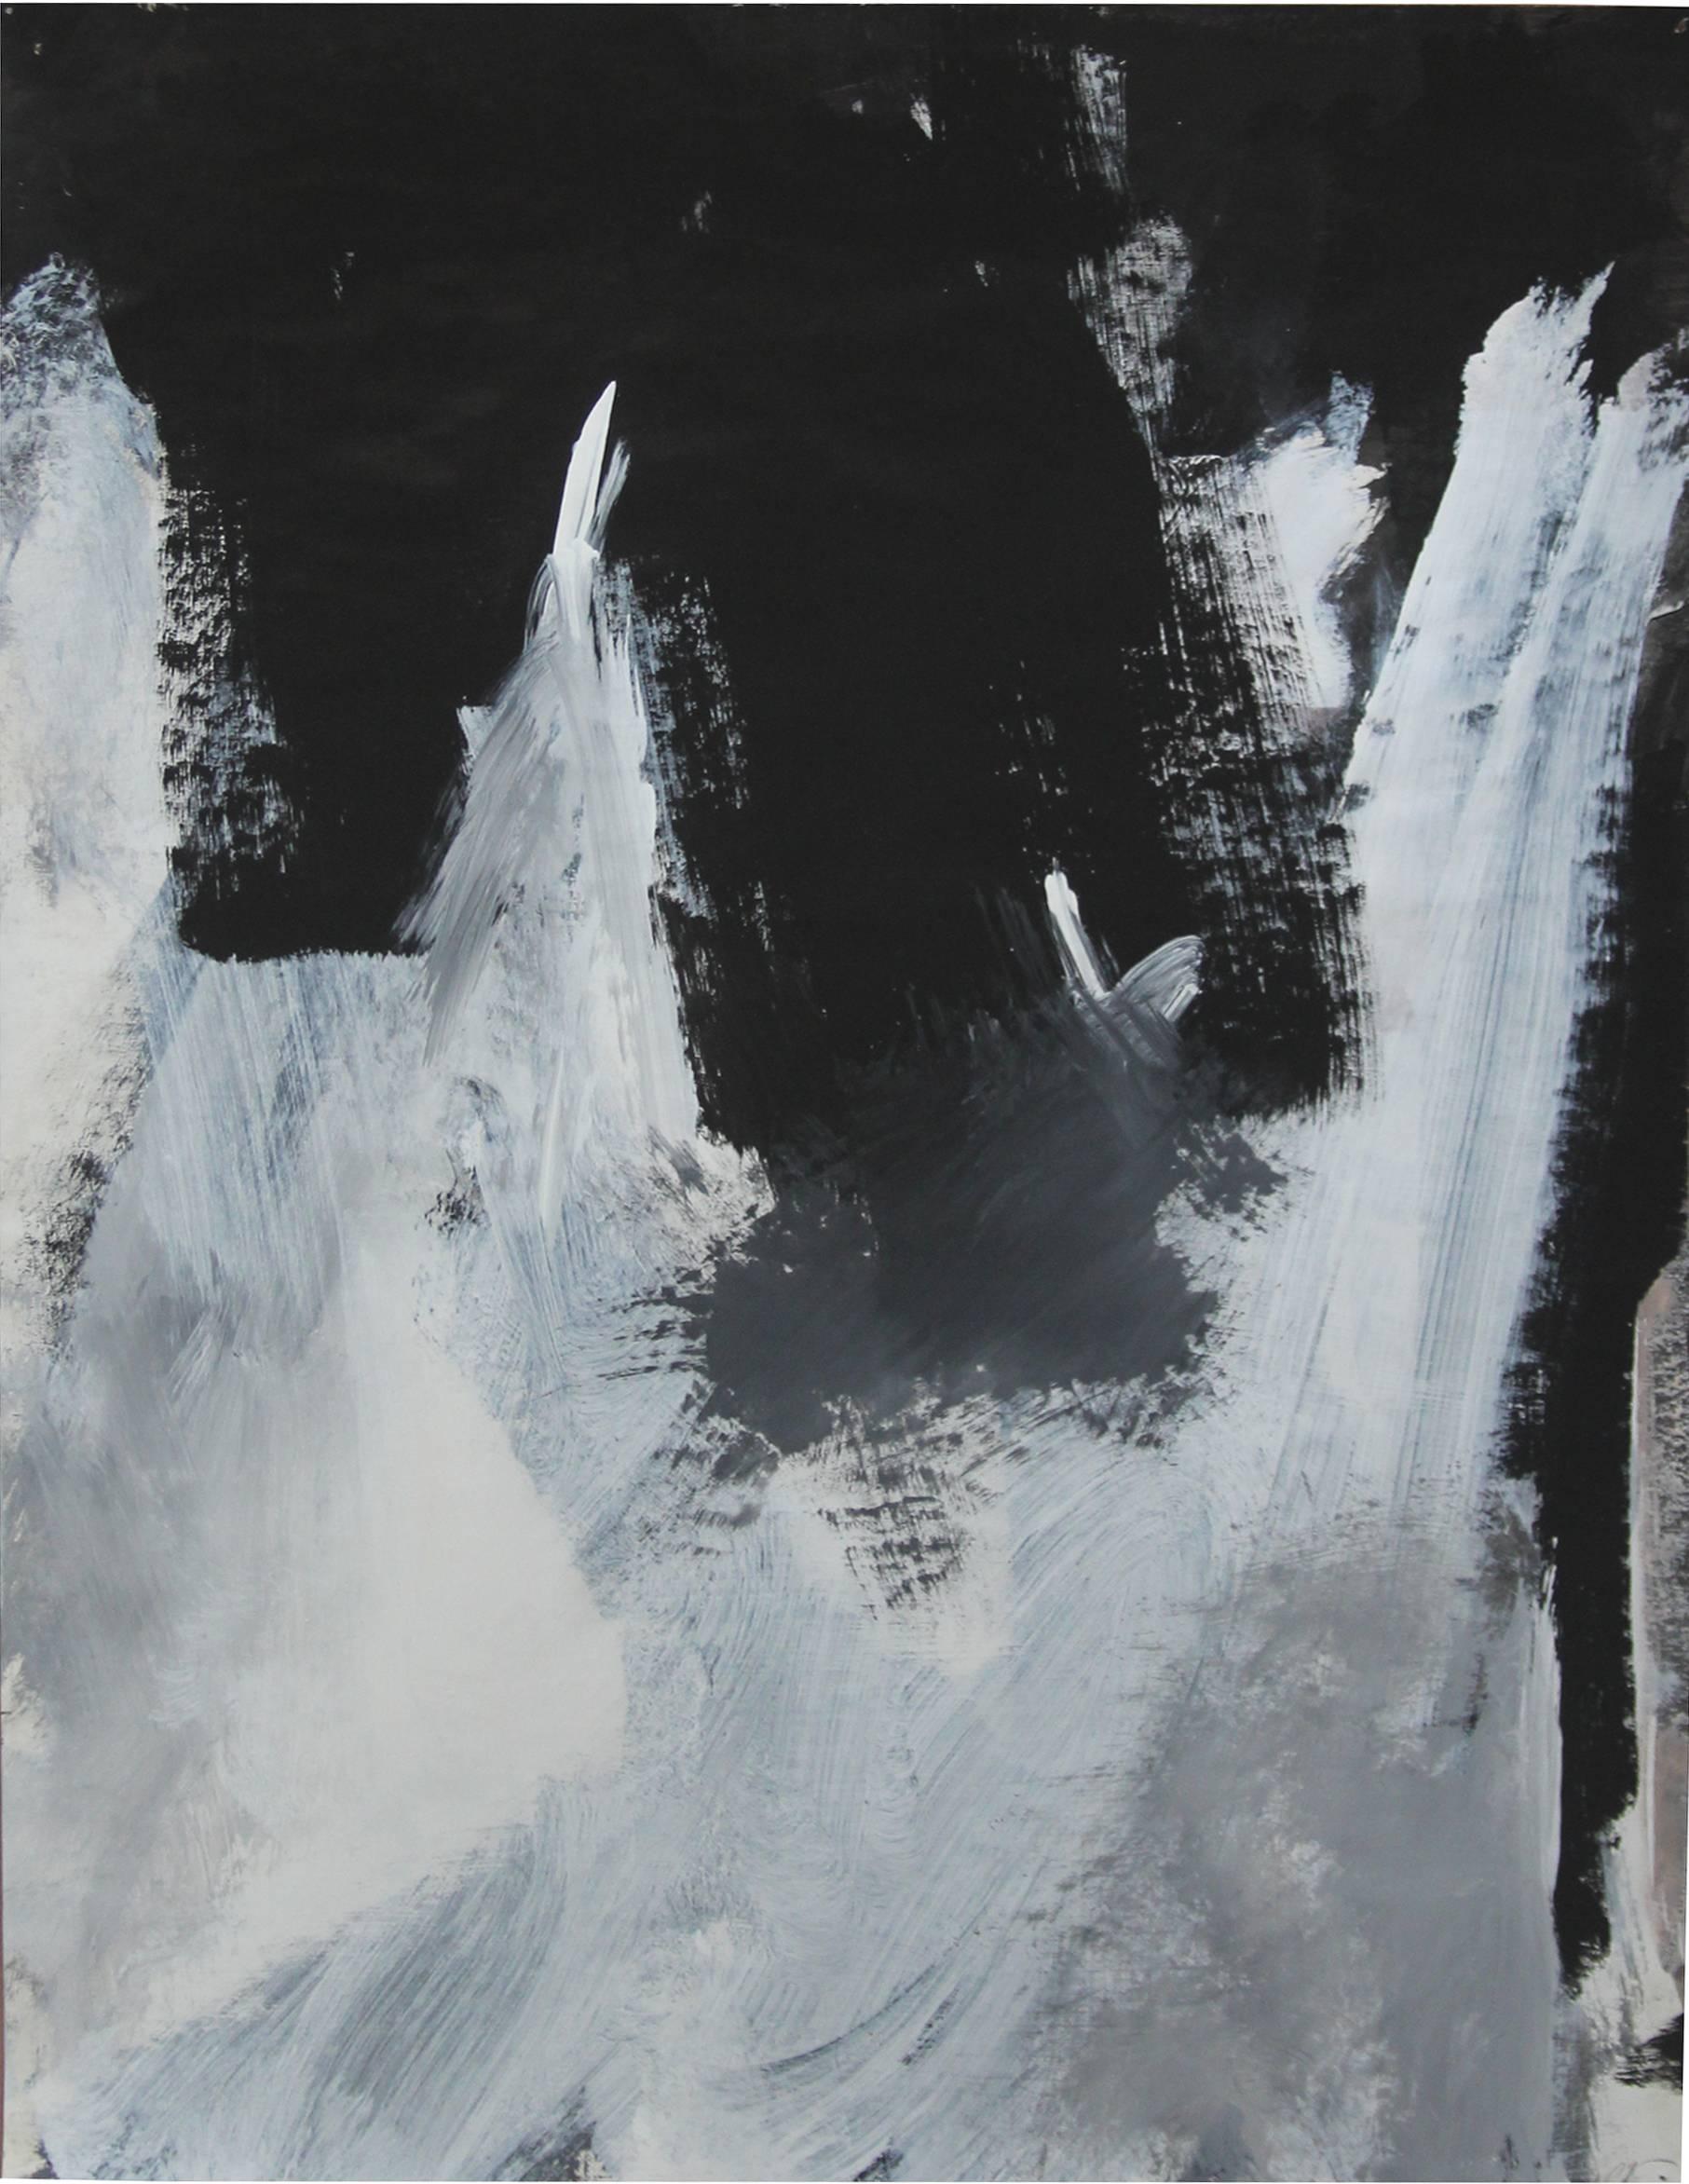 Europa 2 Study, Black & White, Abstract, Work on Paper, Framed, Outer Space, - Painting by Stephanie Cate